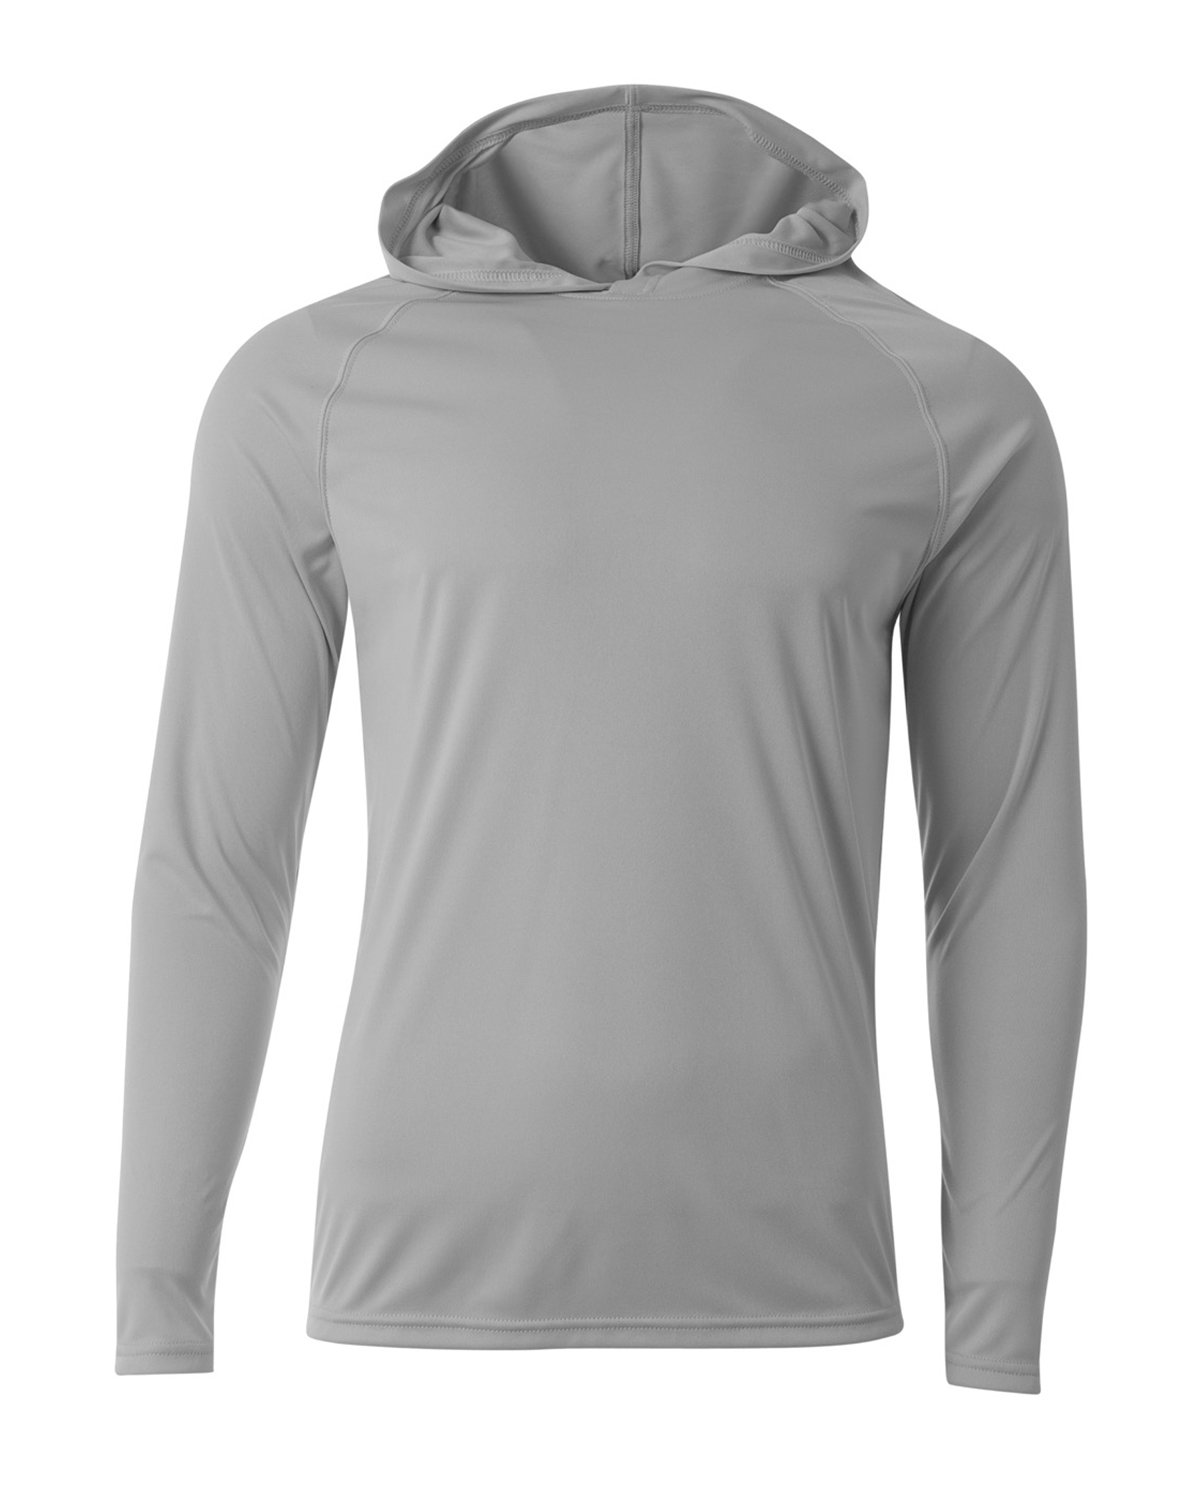 A4 Men's Cooling Performance Long-Sleeve Hooded T-shirt | Generic Site ...